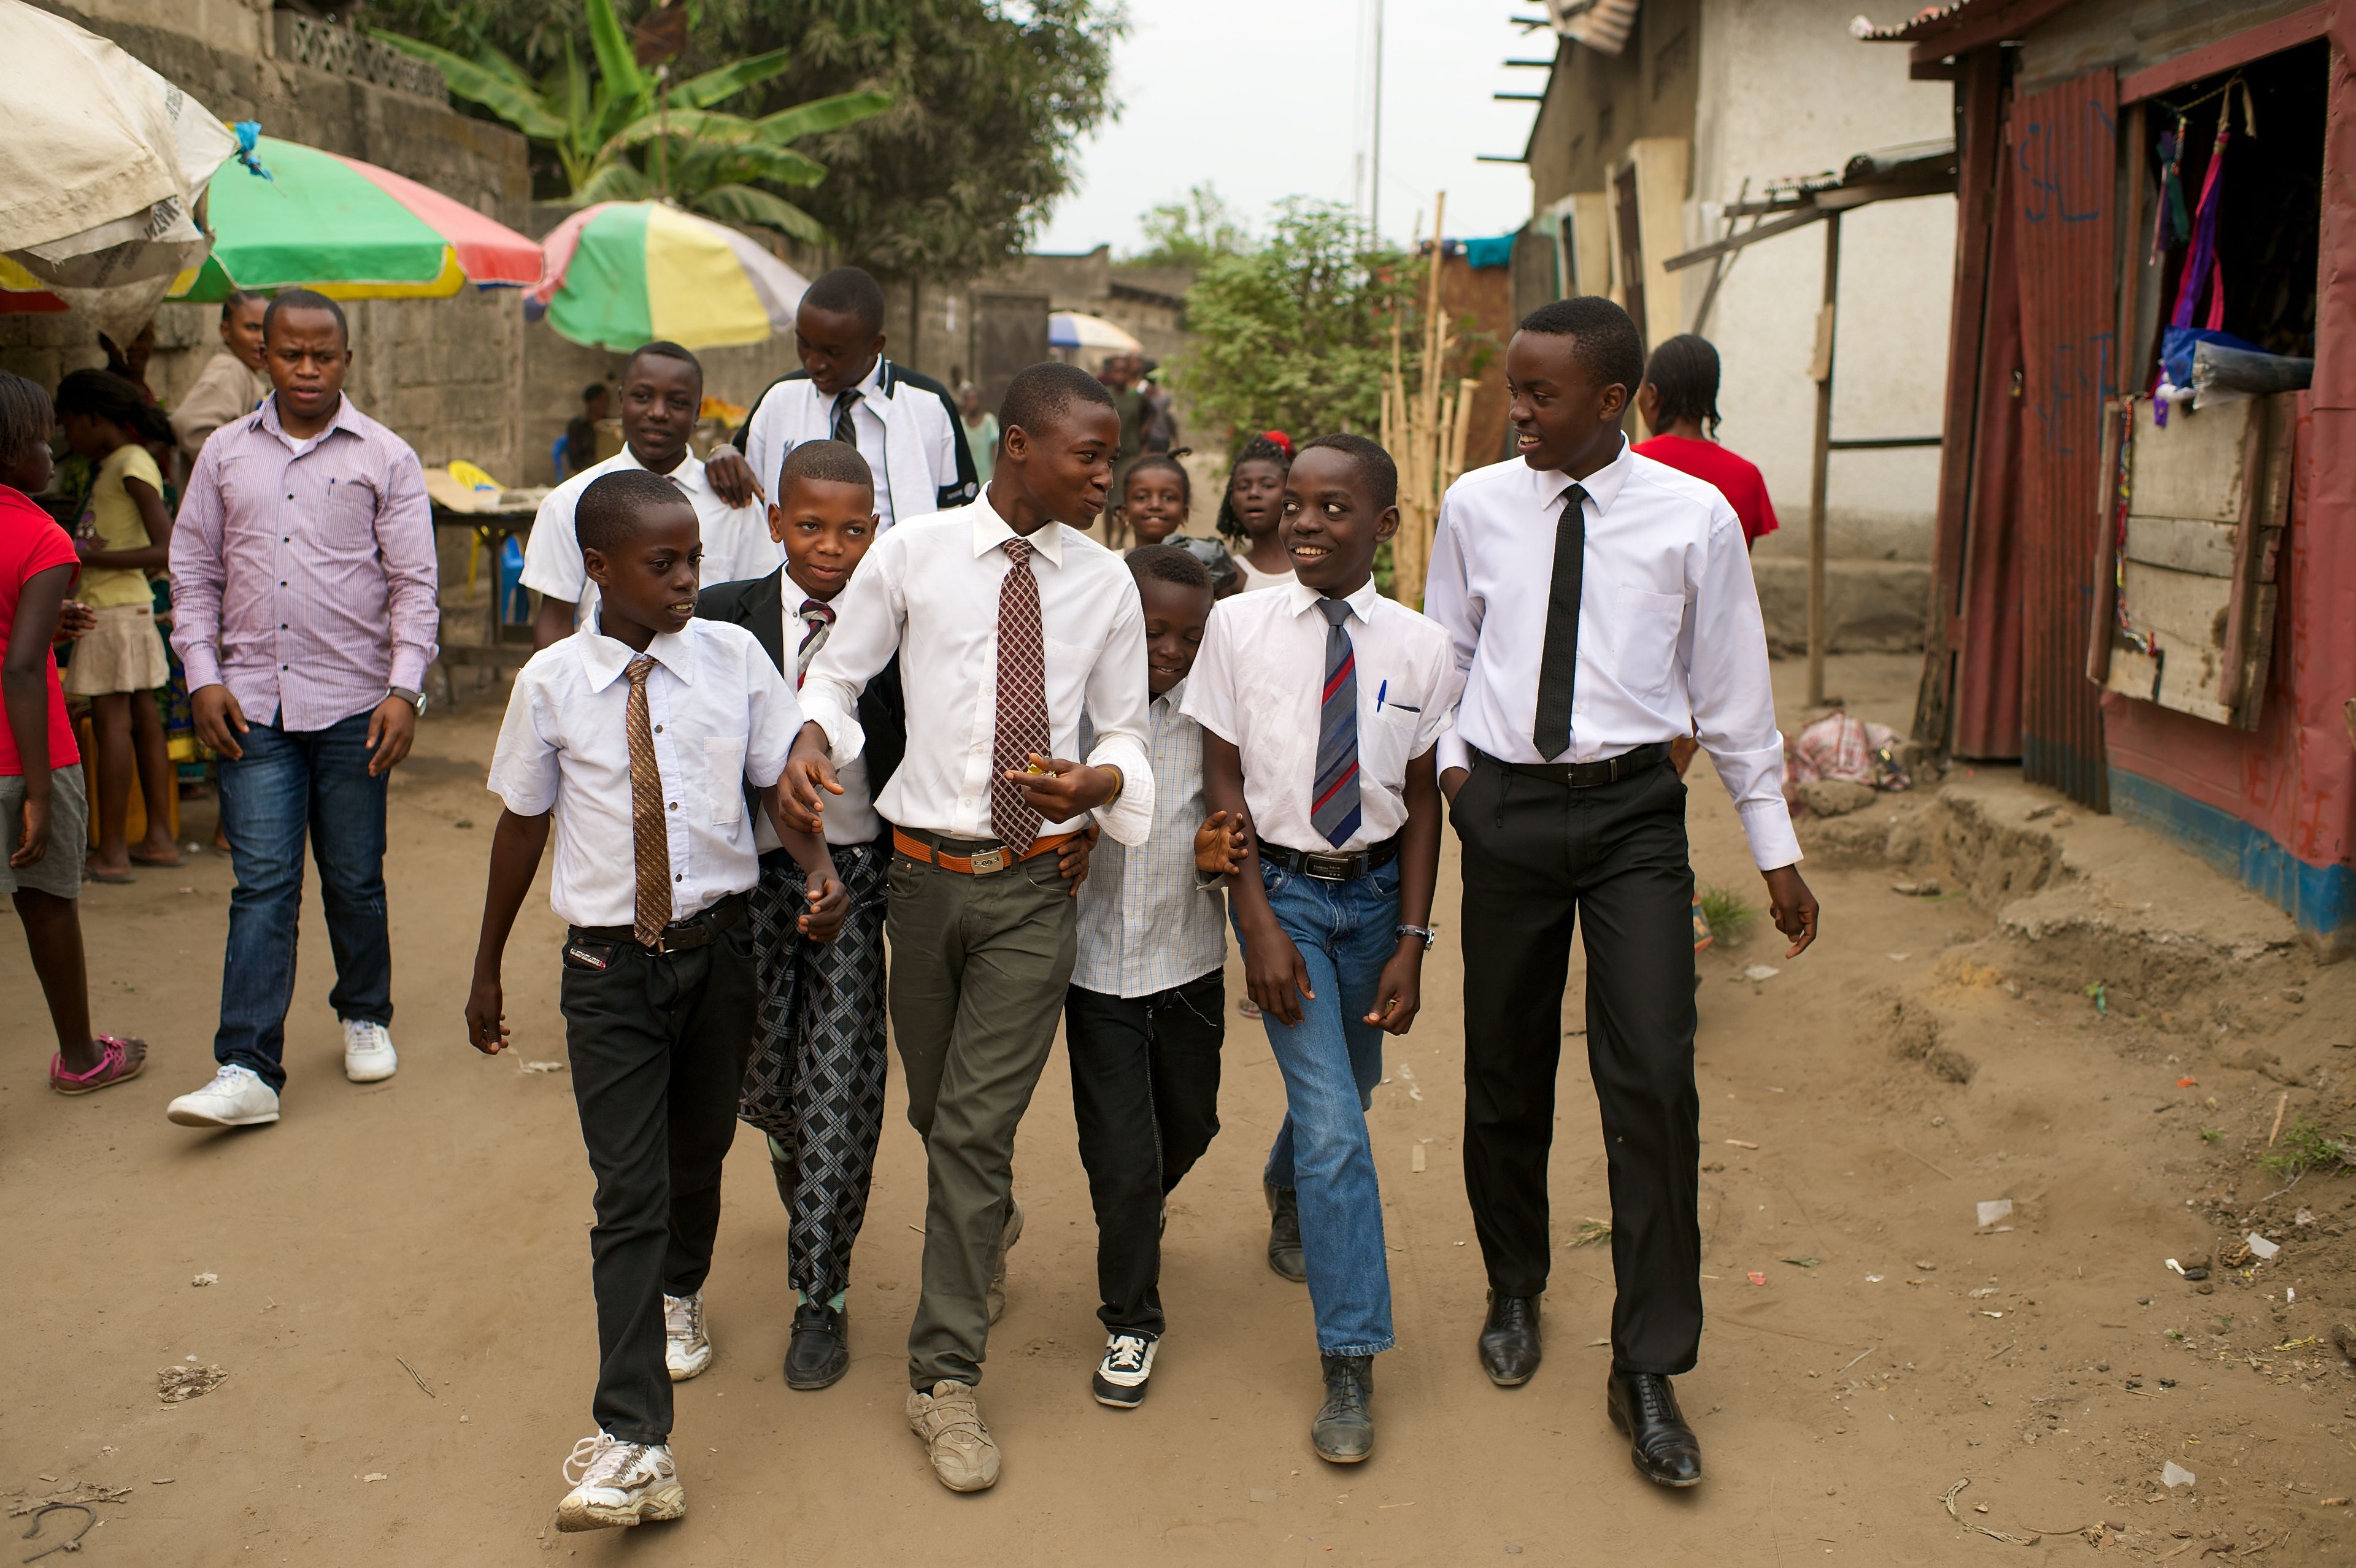 A group of young men from Africa walking in a row down the street.